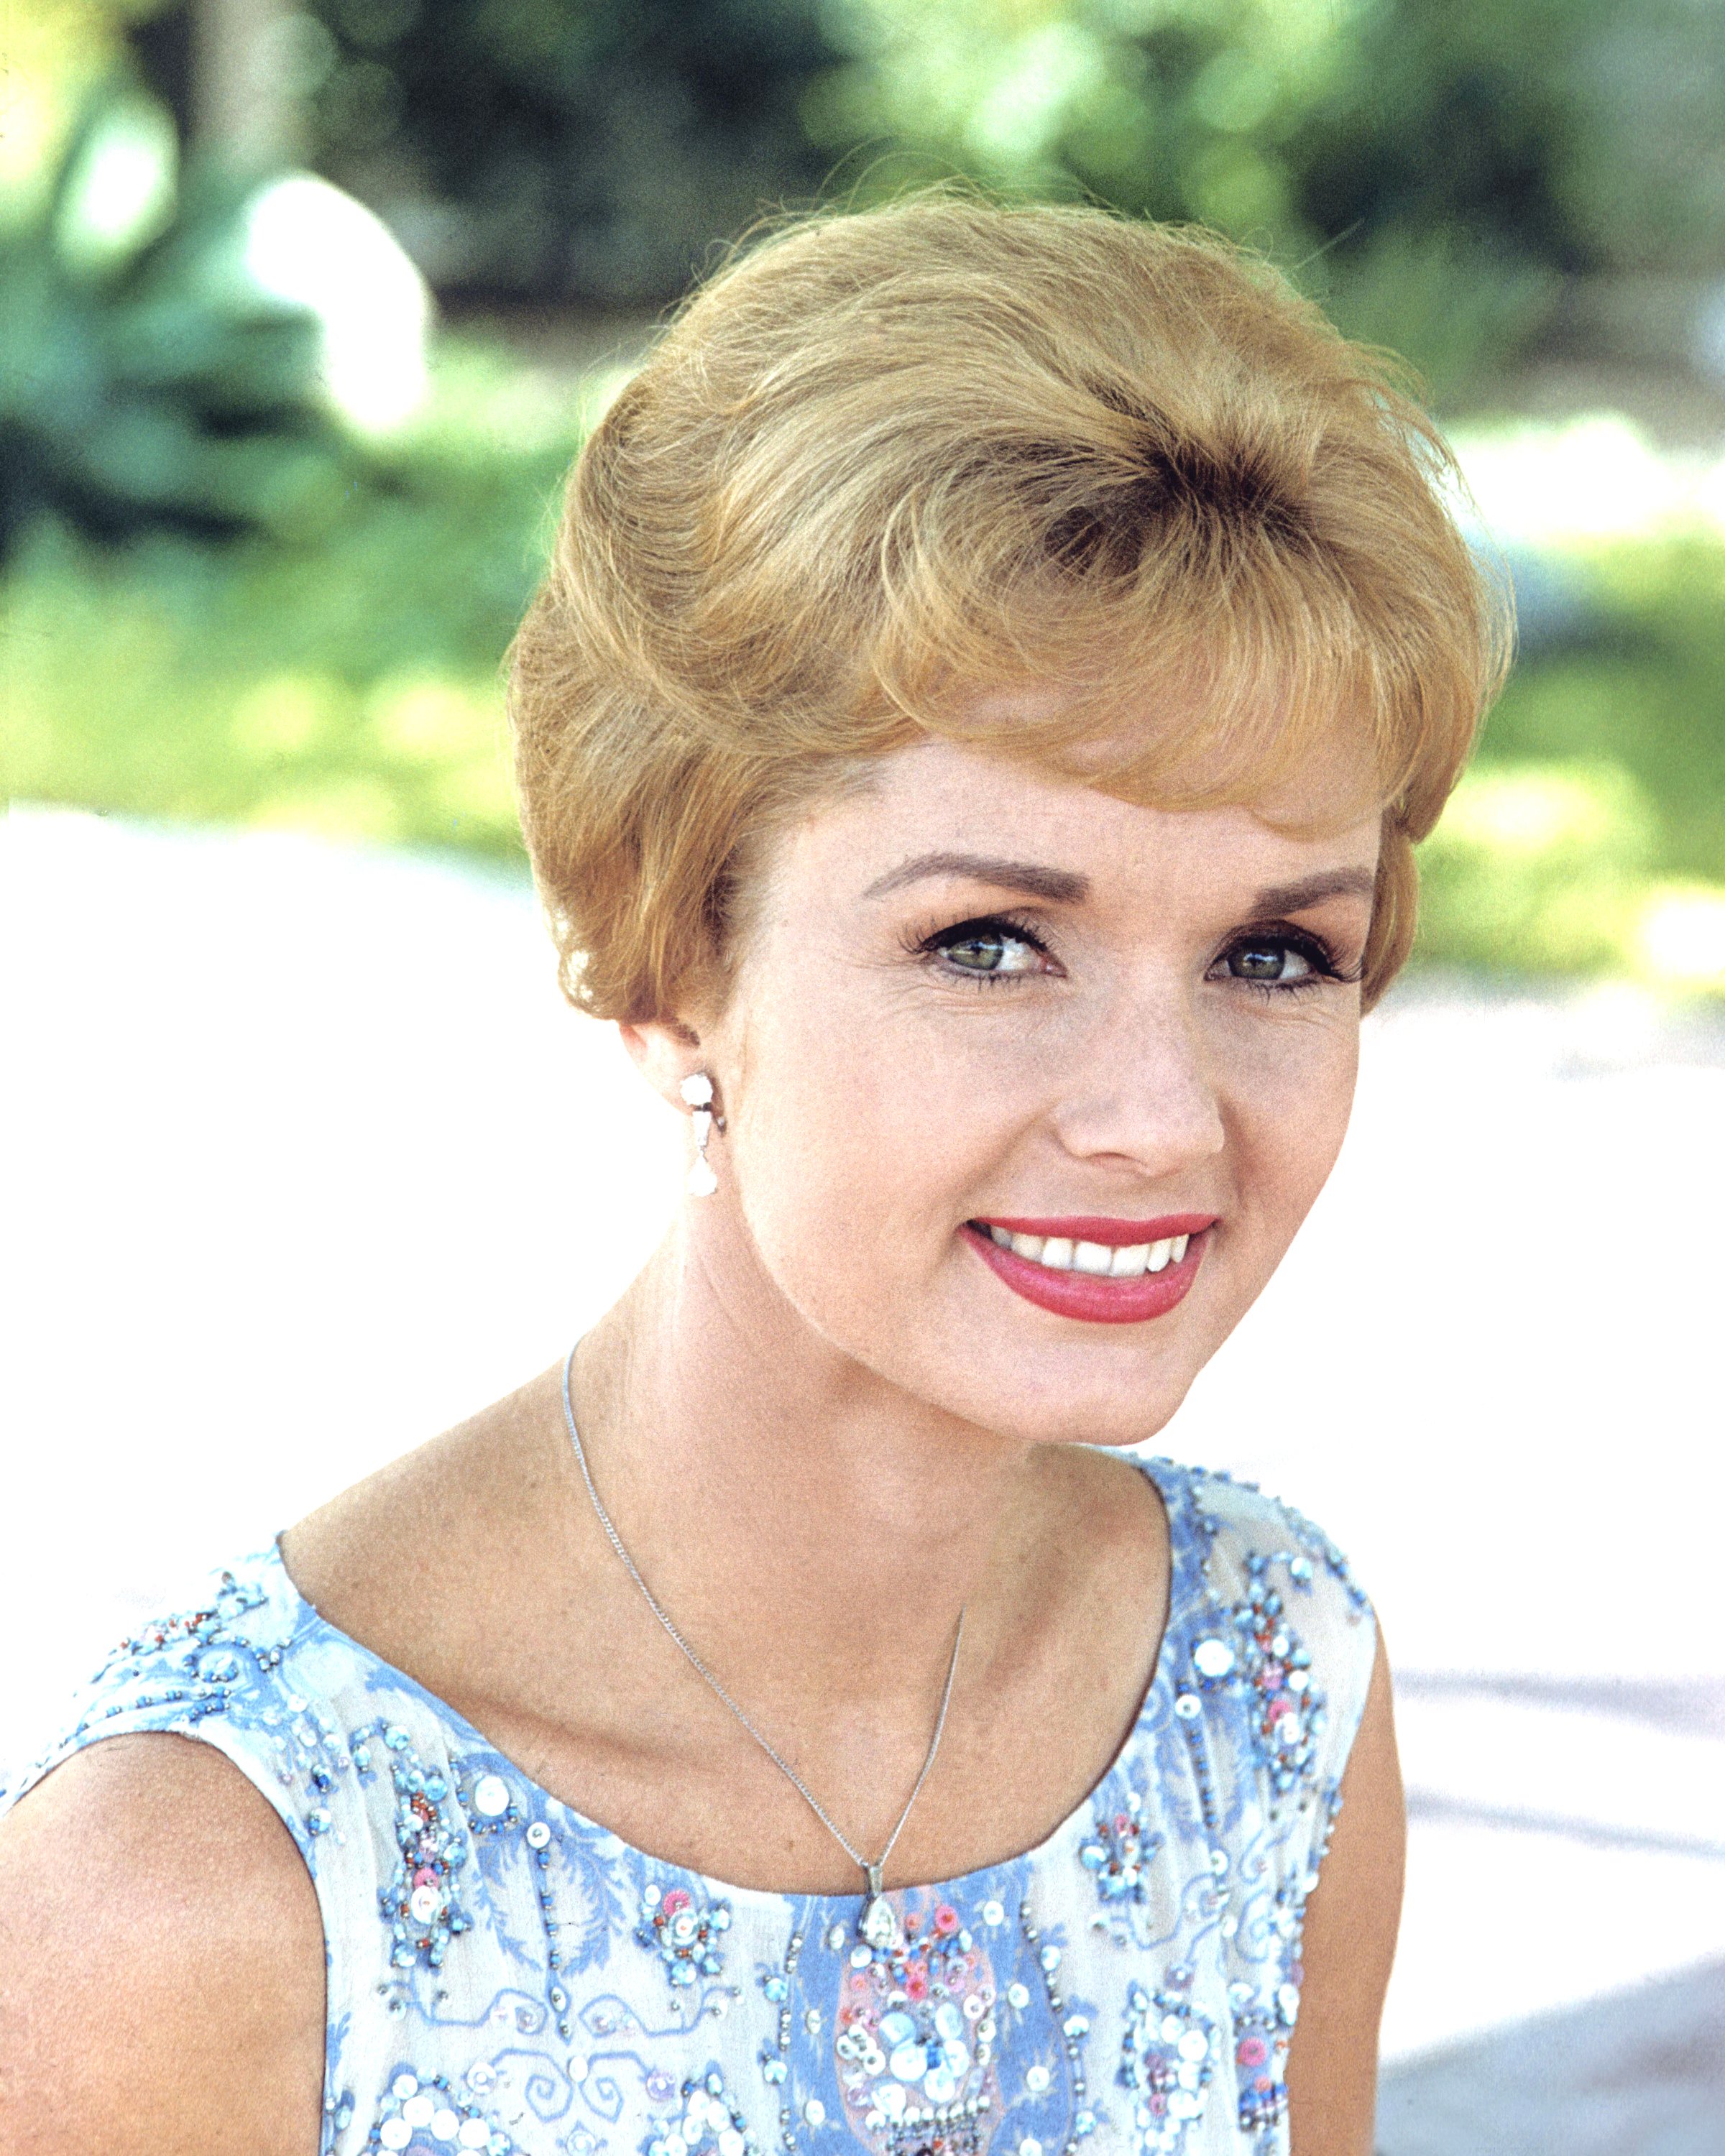 Actress Debbie Reynolds pictured wearing a blue and white print pattern sleeveless top on January 1, 1970 ┃Source: Getty Images